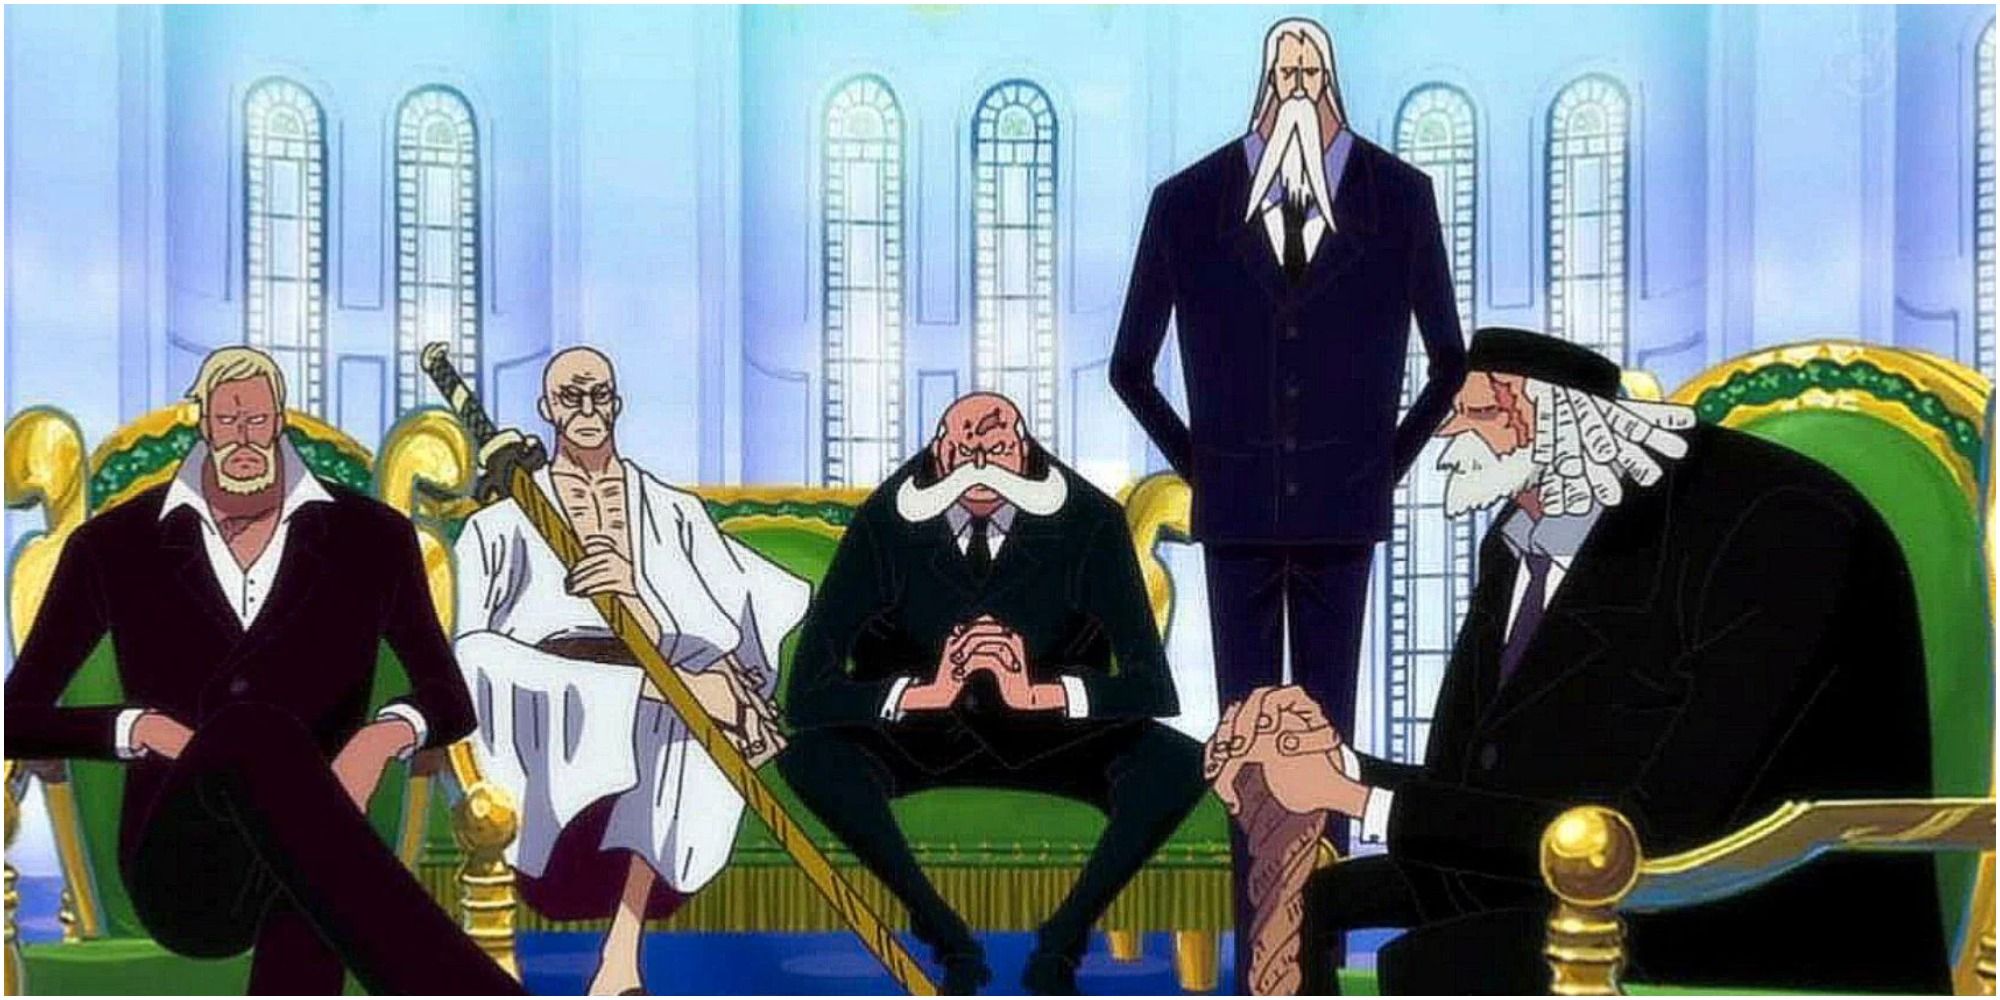 The Five Elders of the World Government in the One Piece anime